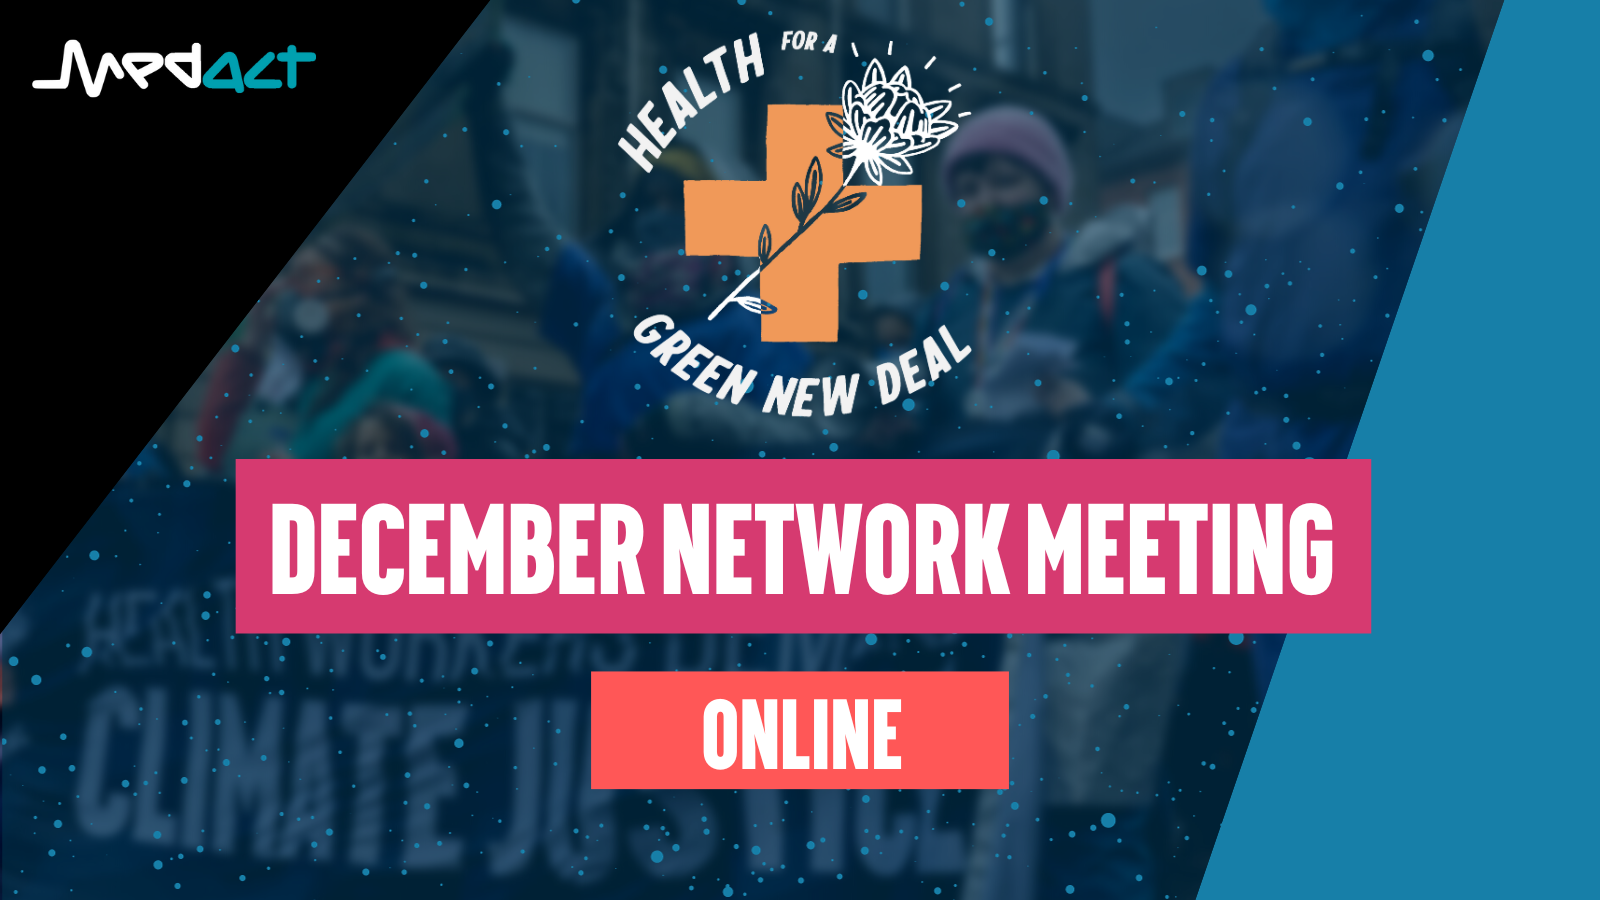 Health for a Green New Deal: December network meeting